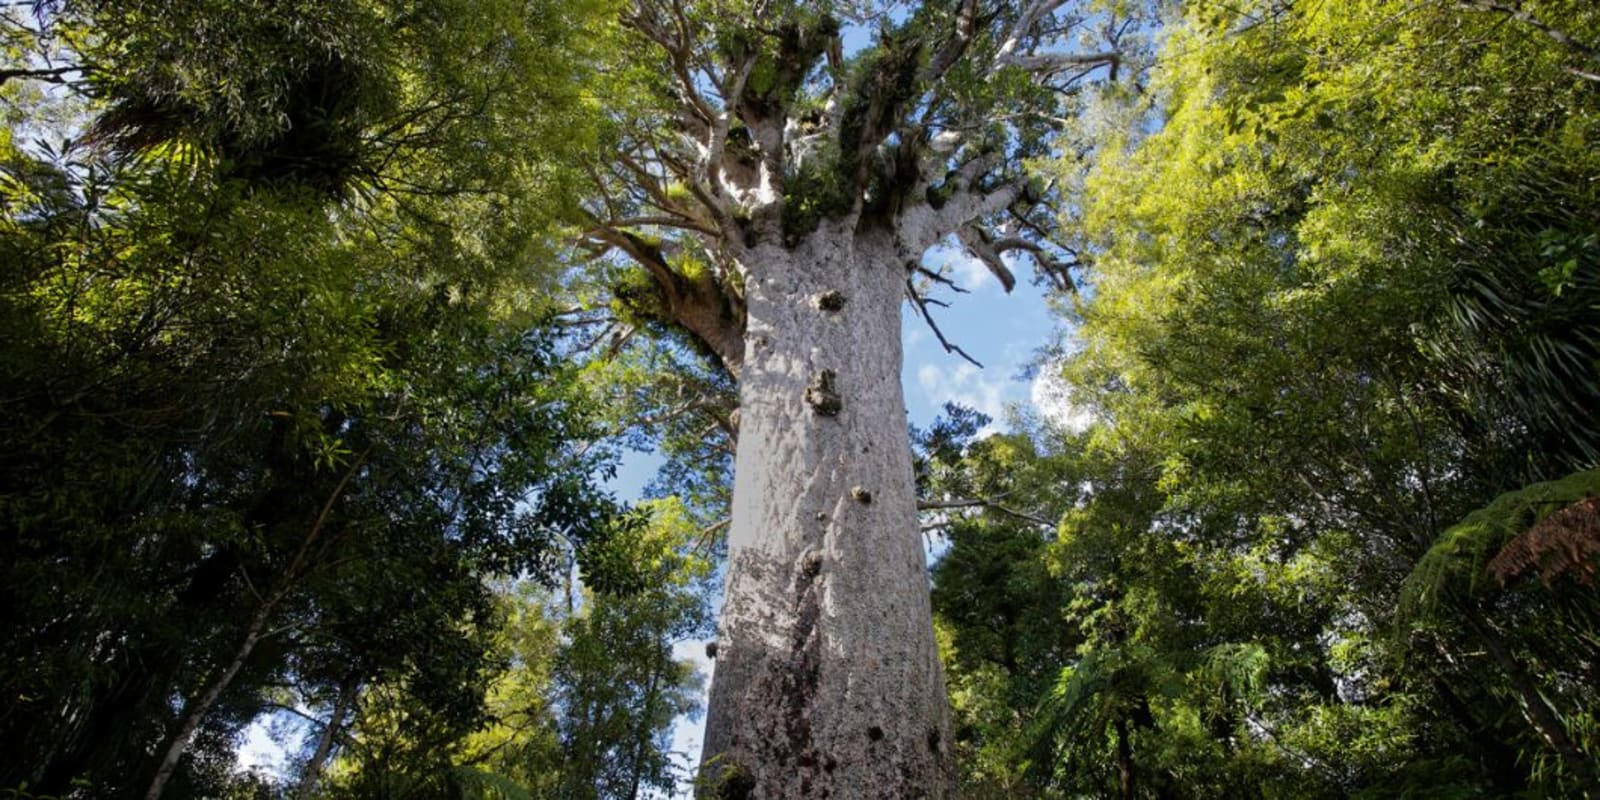 Waipoua Forest in New Zealand